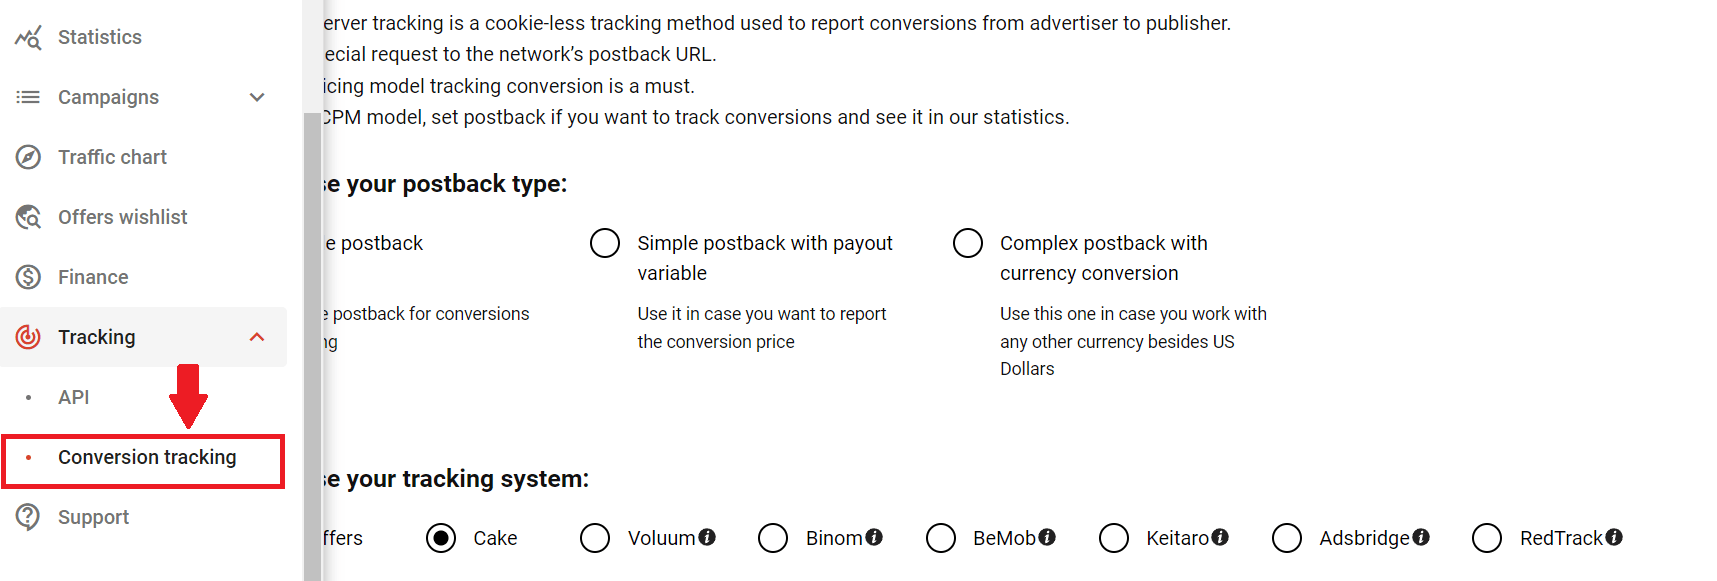 conversion-tracking-with-adsterra